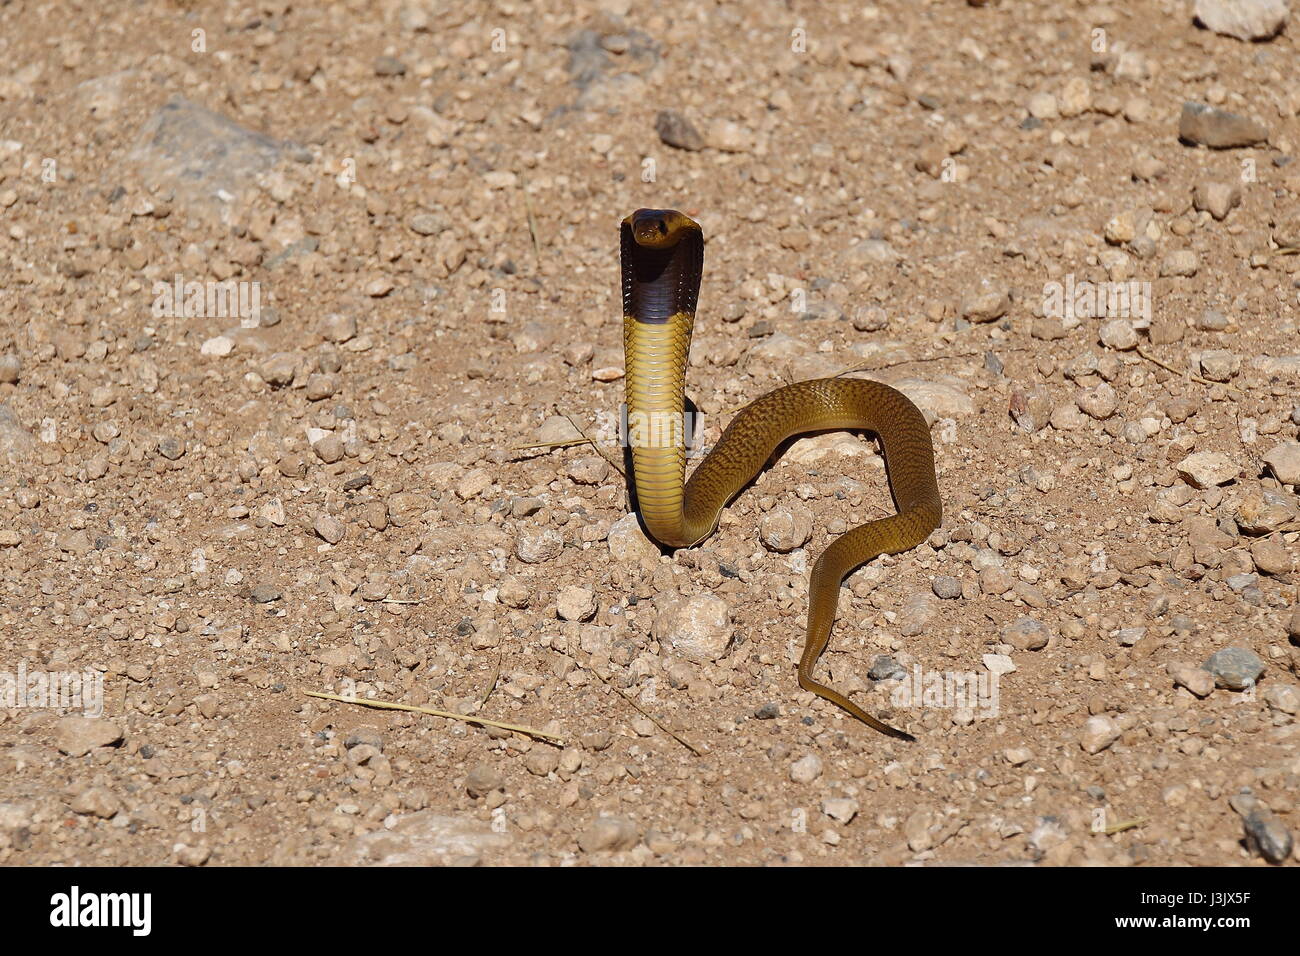 Juvenile Cape cobra a snake endemic to South Africa Stock Photo